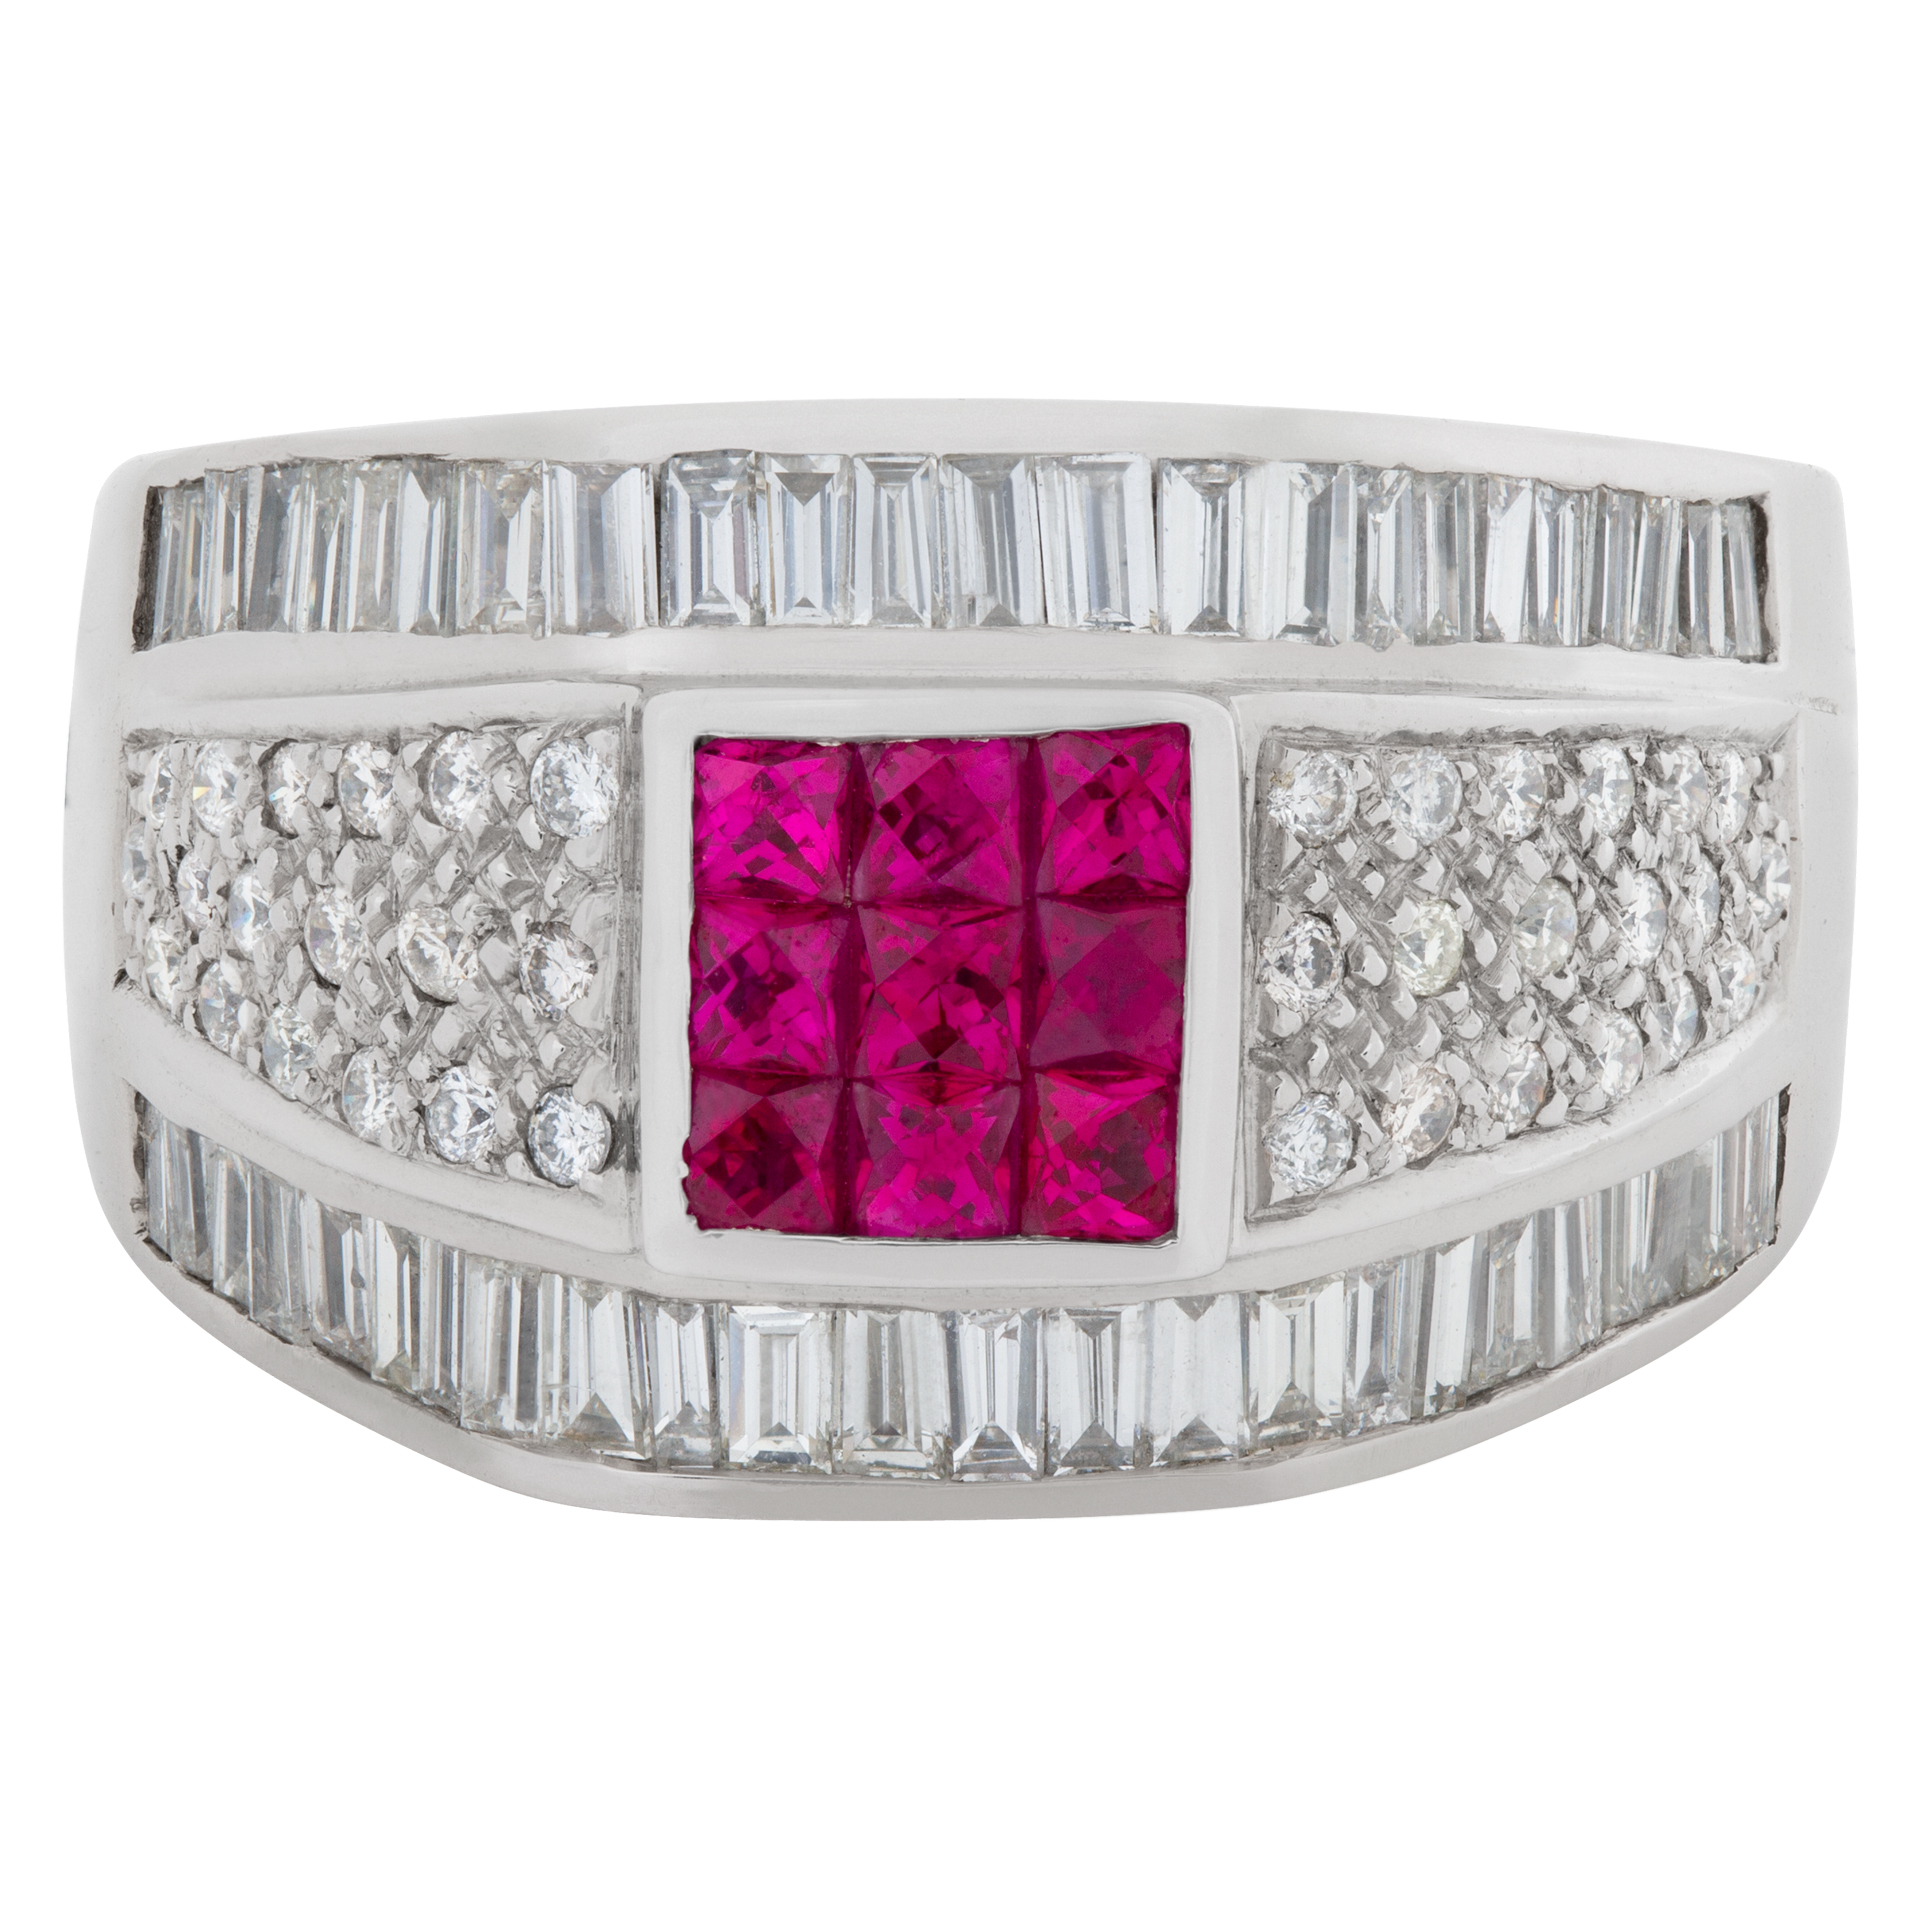 Fancy rubies and diamond ring in 18k white gold. 1.00 carats in diamonds. Size 8.5 image 2